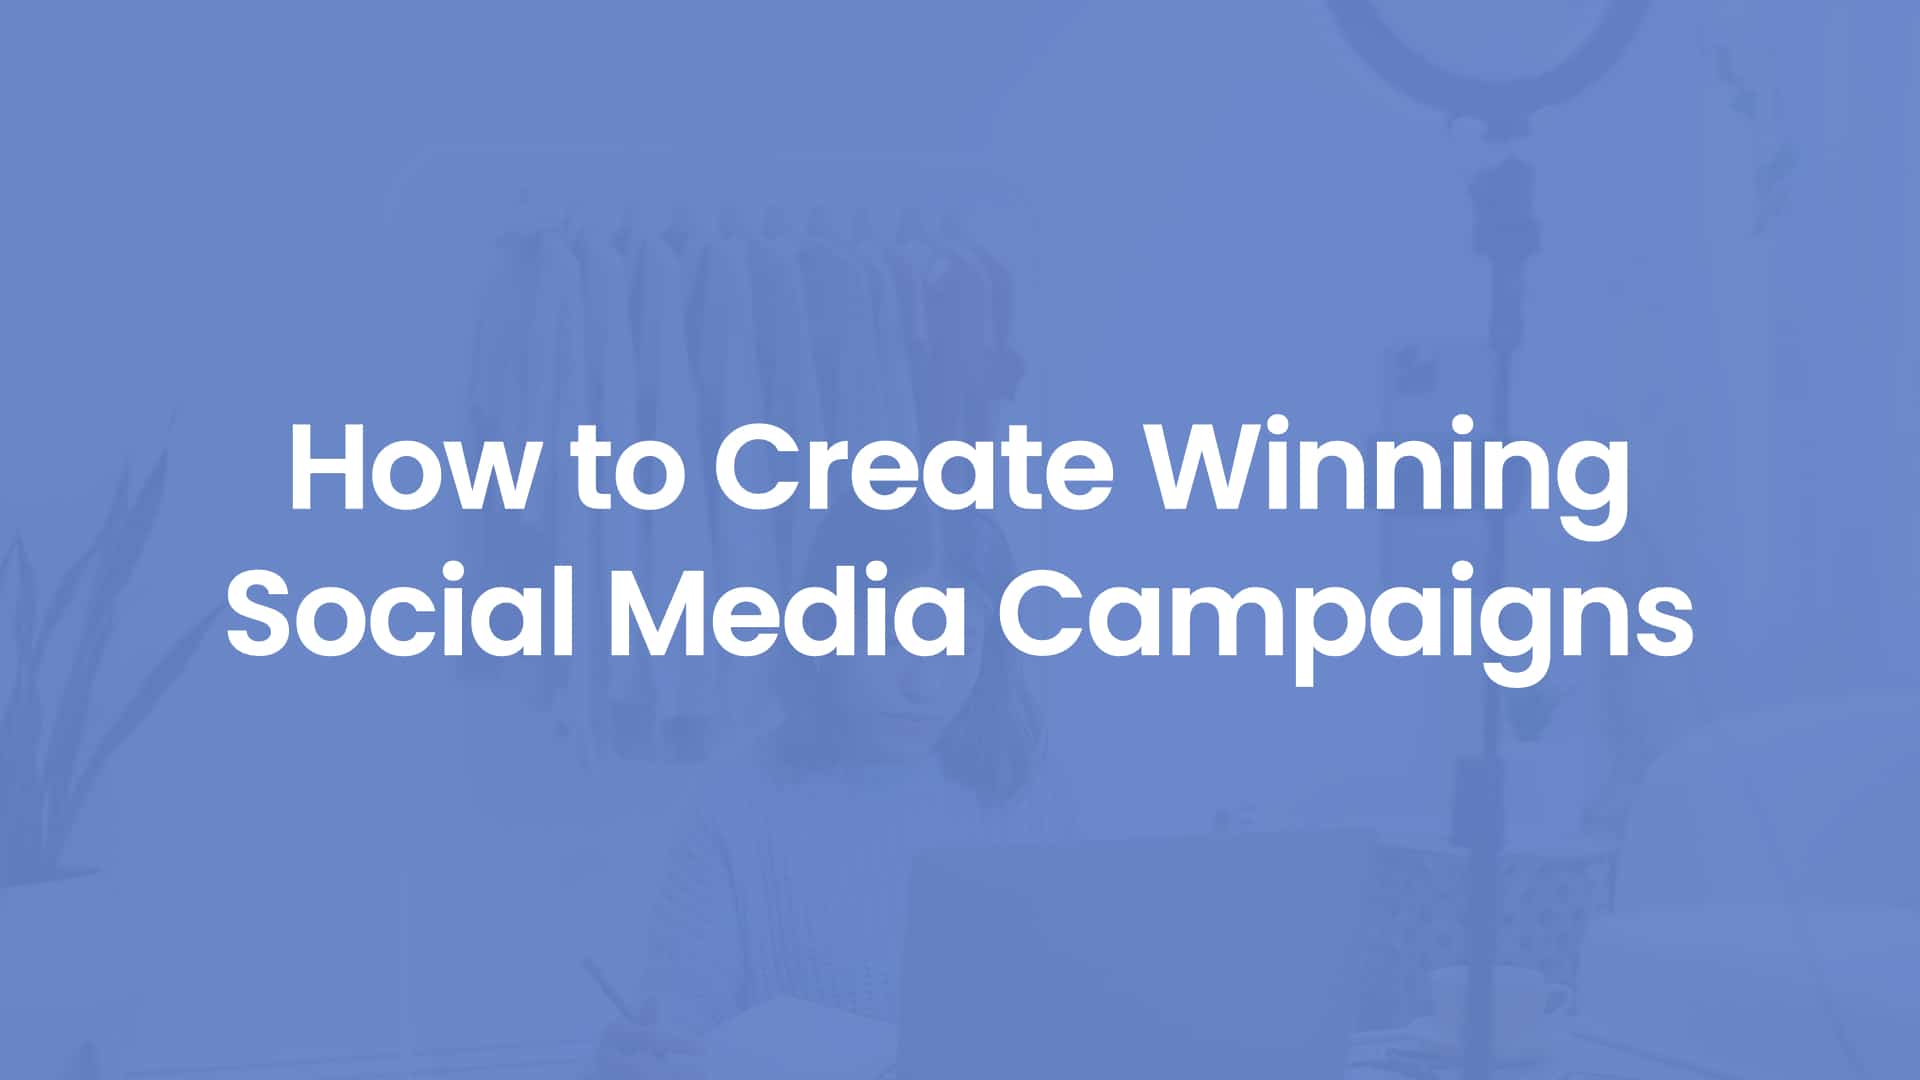 How to Create Winning Social Media Campaigns - Equinet Academy